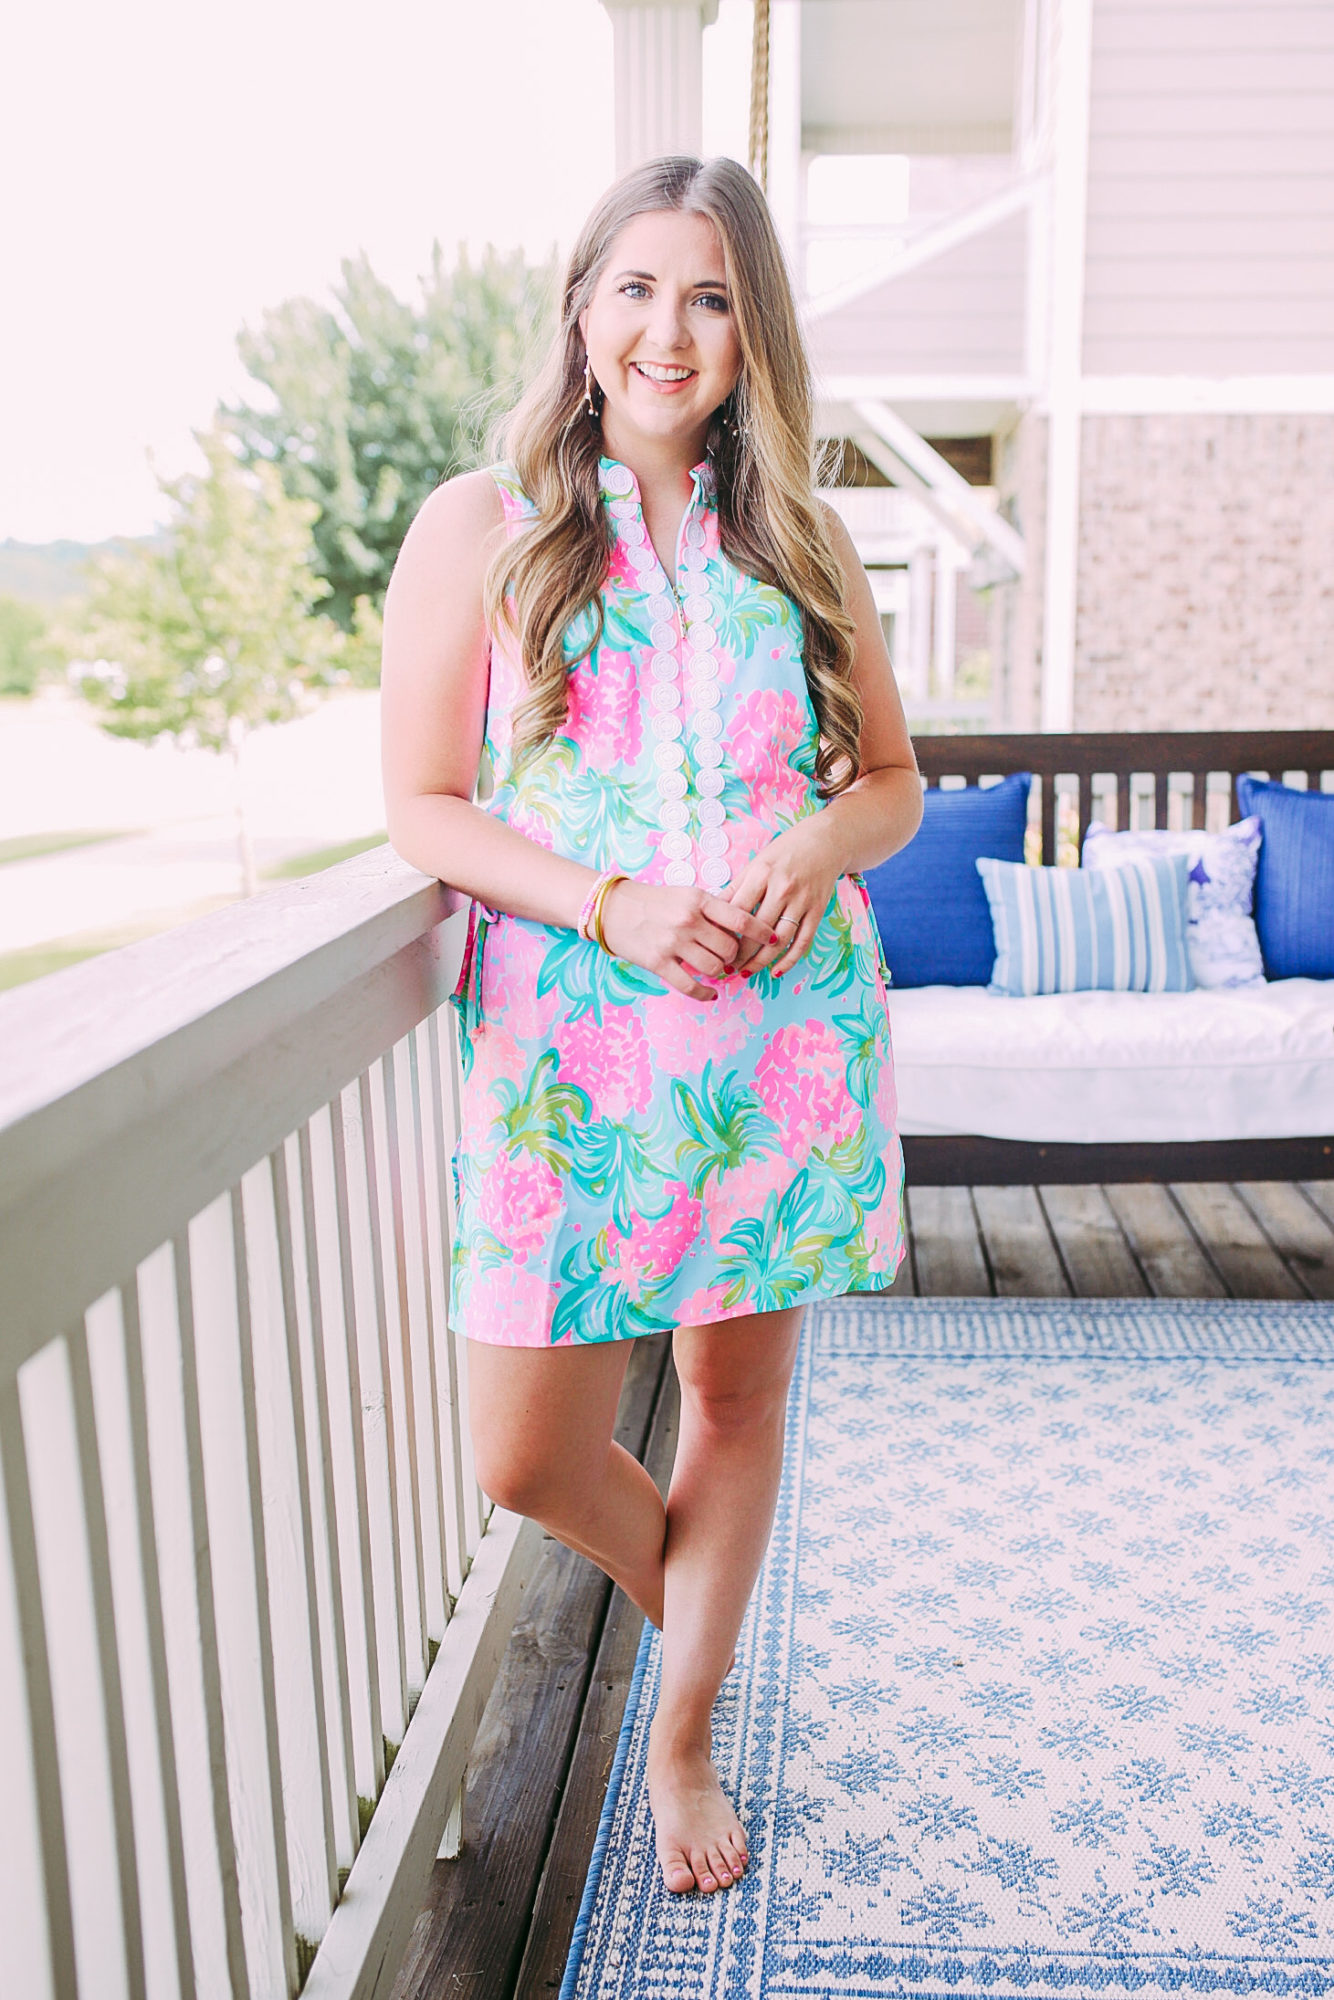 Comprehensive Lilly Pulitzer Sizing Guide Part 2 - Thrifty Pineapple